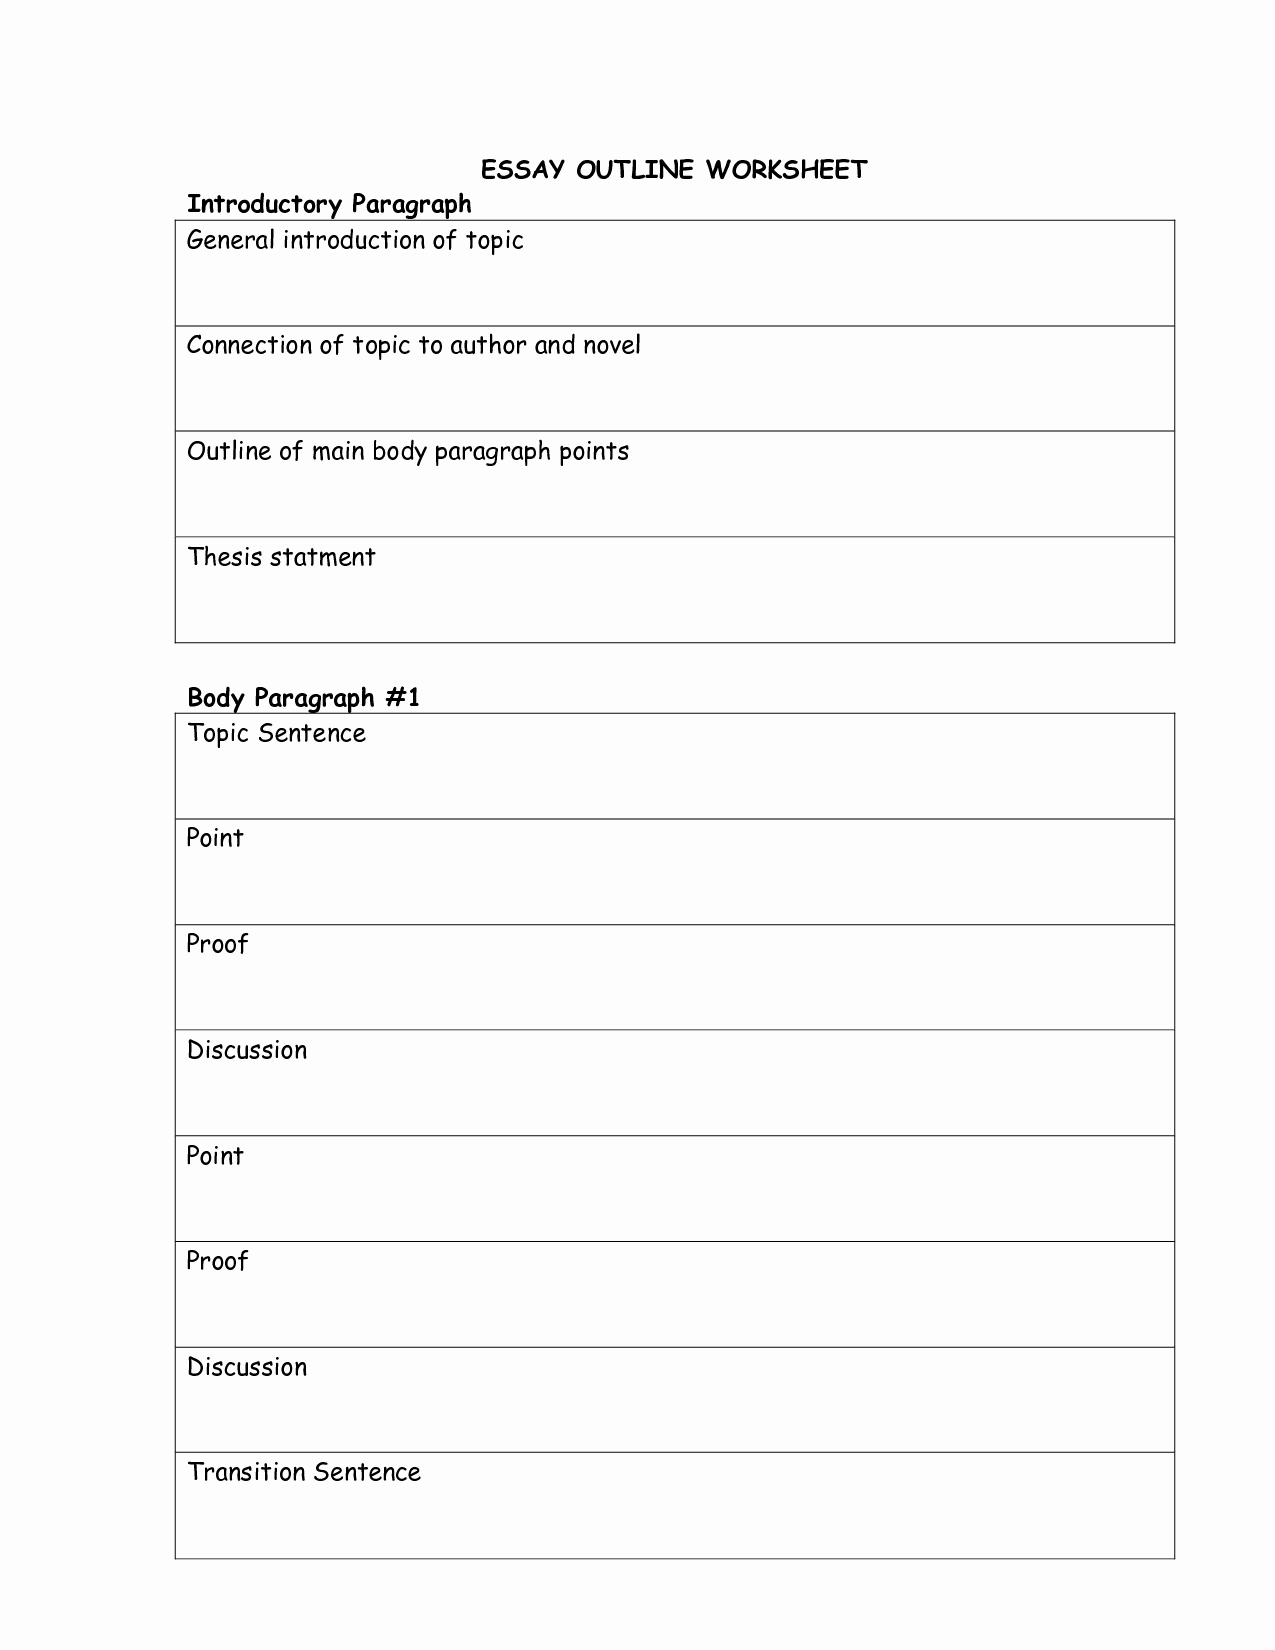 High School Essay Writing Worksheets Best Of College Printable Gallery Category Page 1